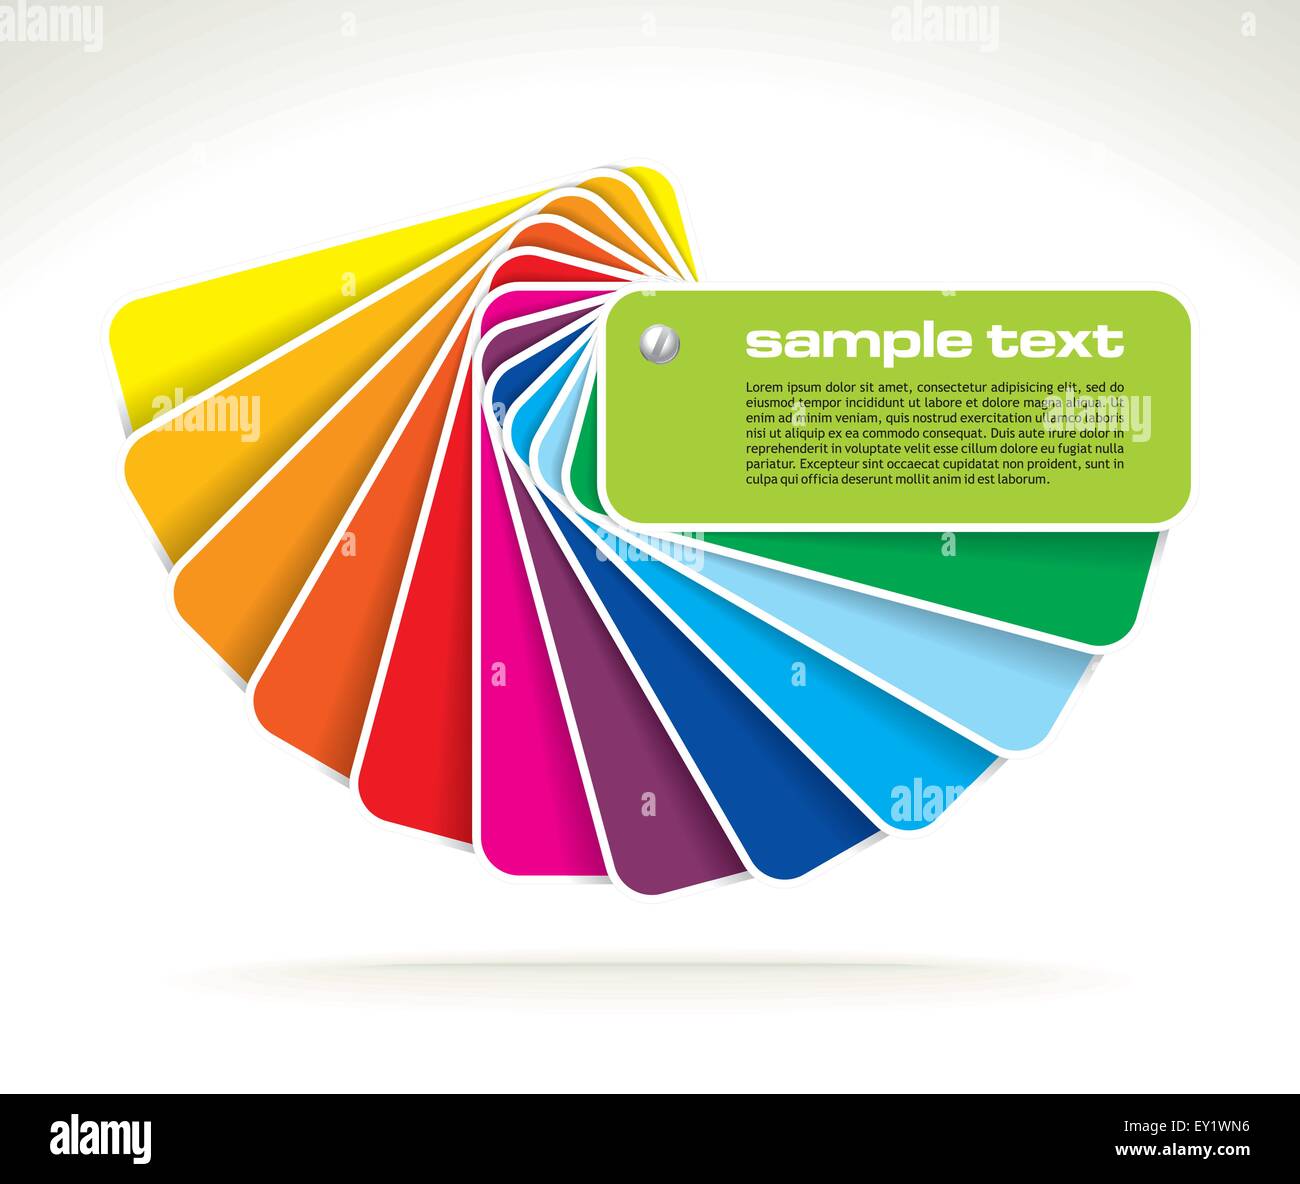 colour guide with sample text- vector illustration Stock Vector